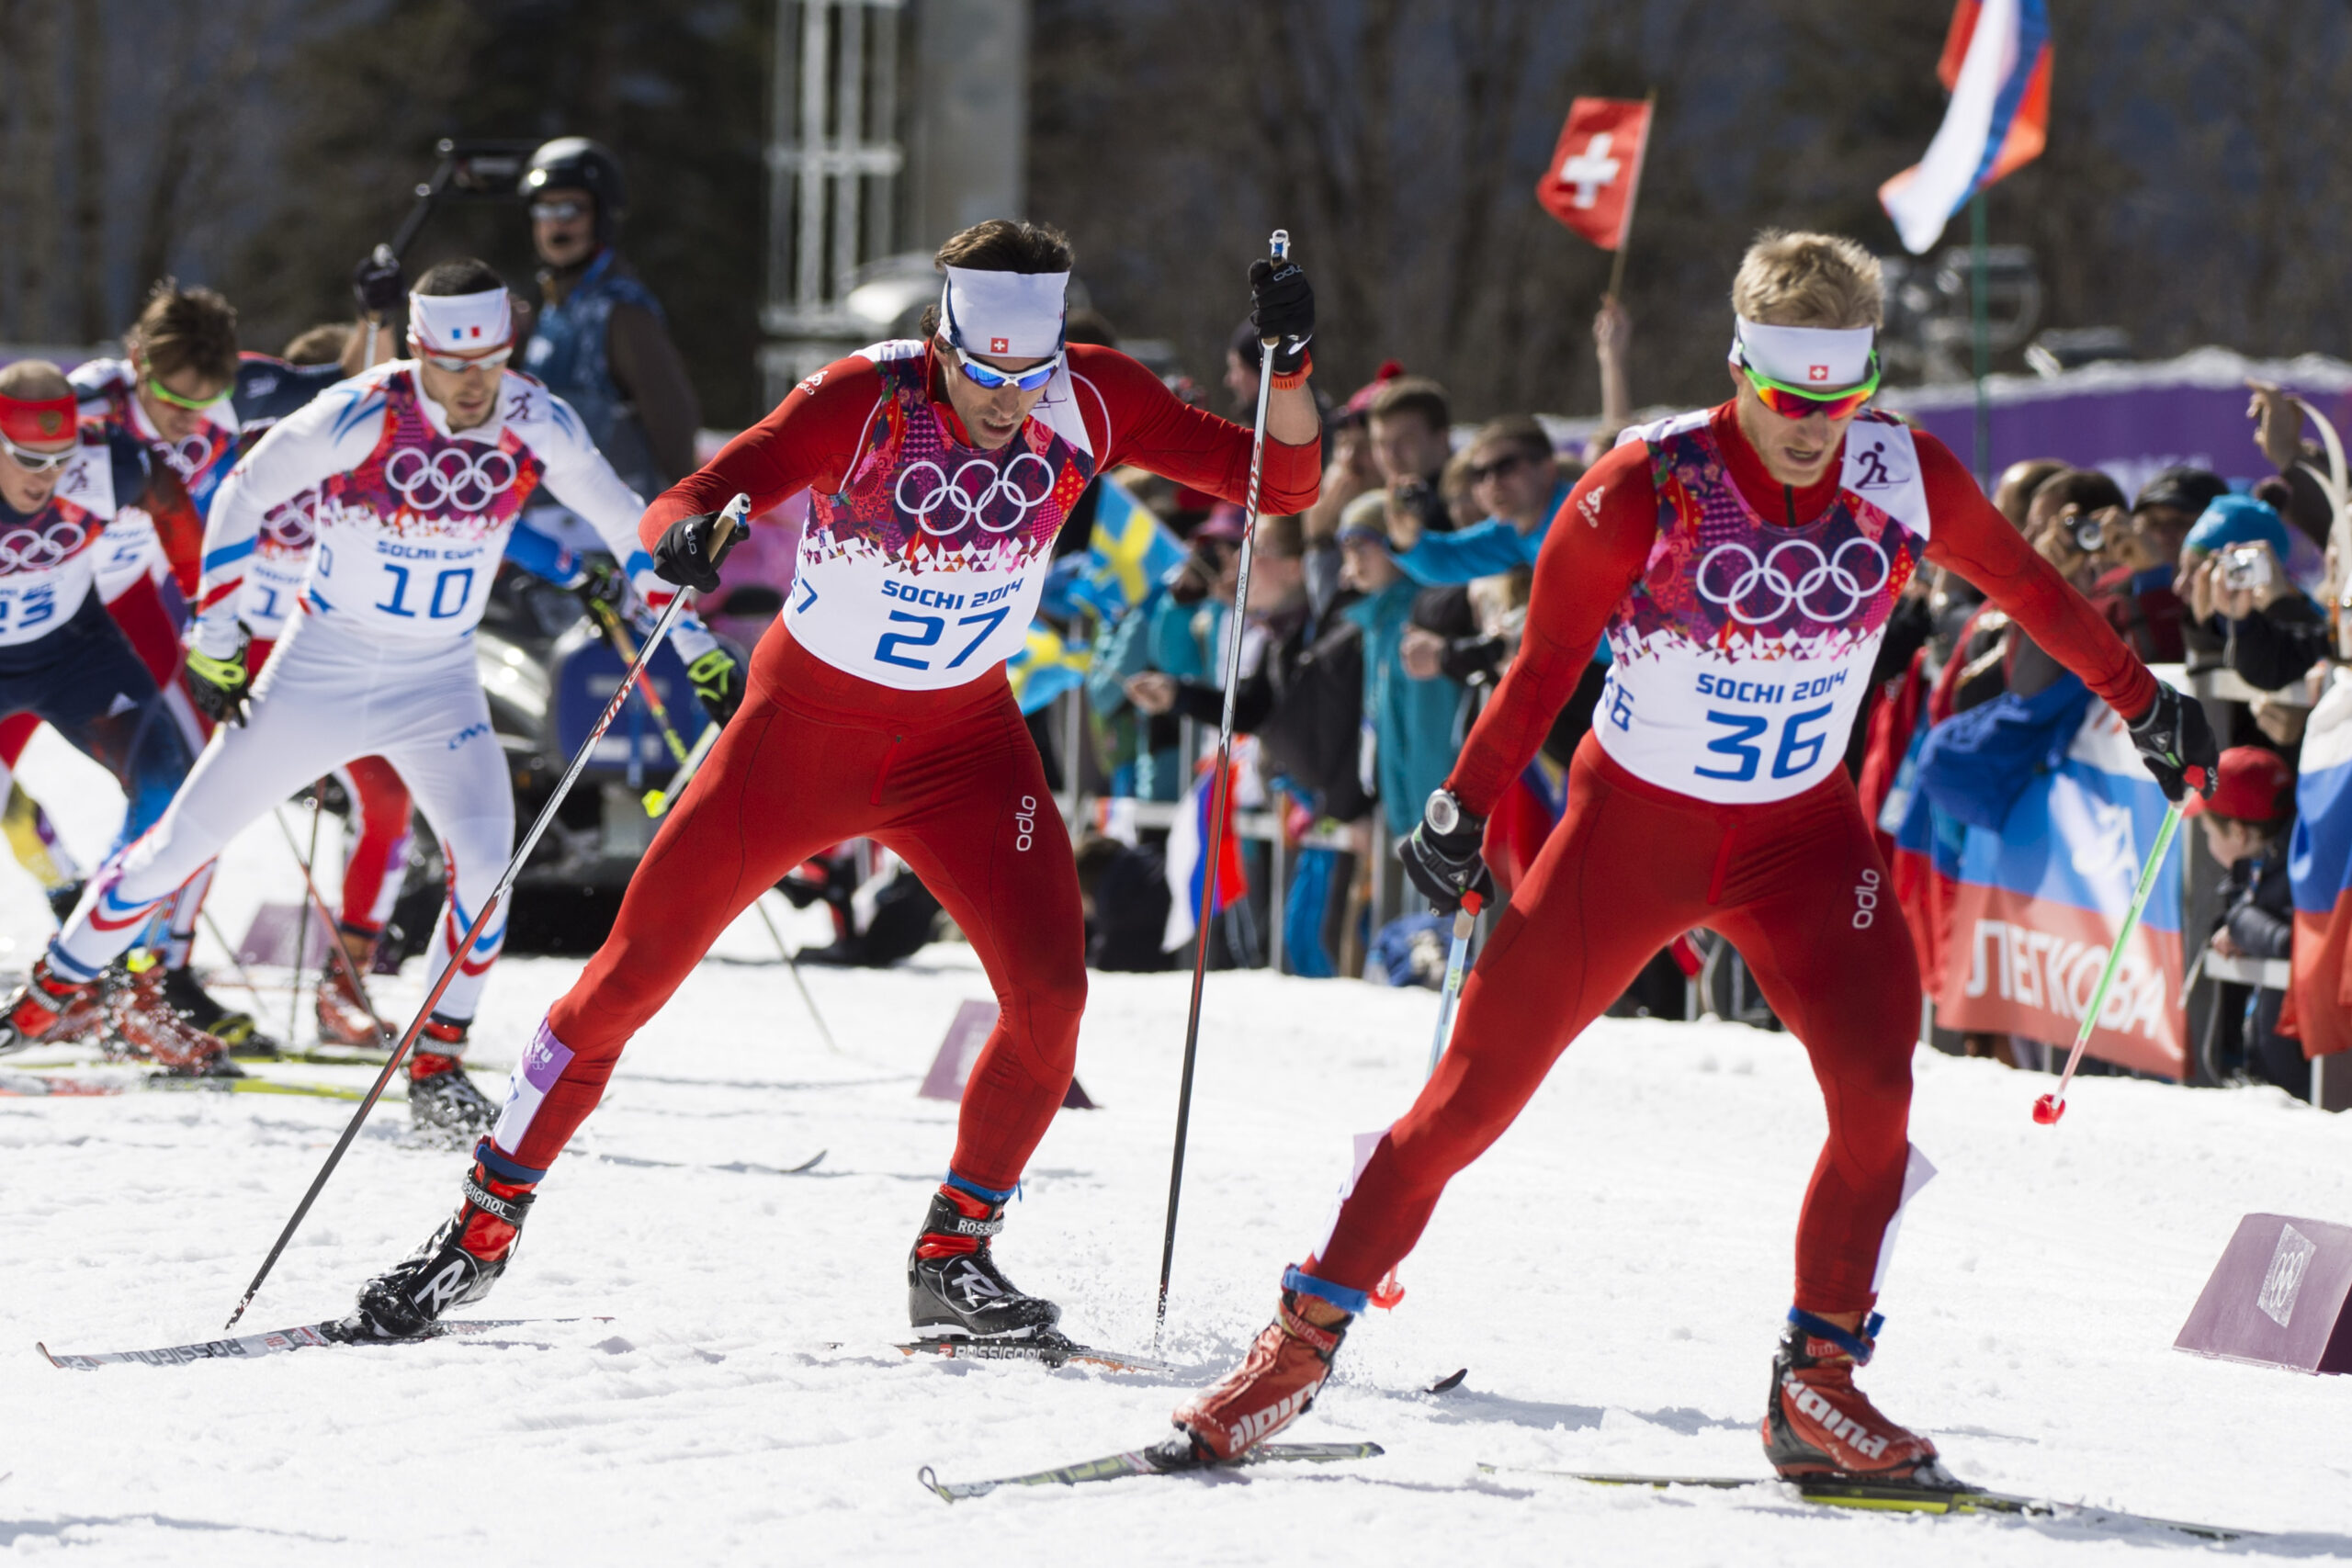 Curdin Perl, left, and Remo Fischer, right, of Switzerland in action during the men's cross country mass start 50km competition at the XXII Winter Olympics 2014 Sochi in Krasnaya Polyana, Russia, on Sunday, February 23, 2014. (KEYSTONE/Jean-Christophe Bott)